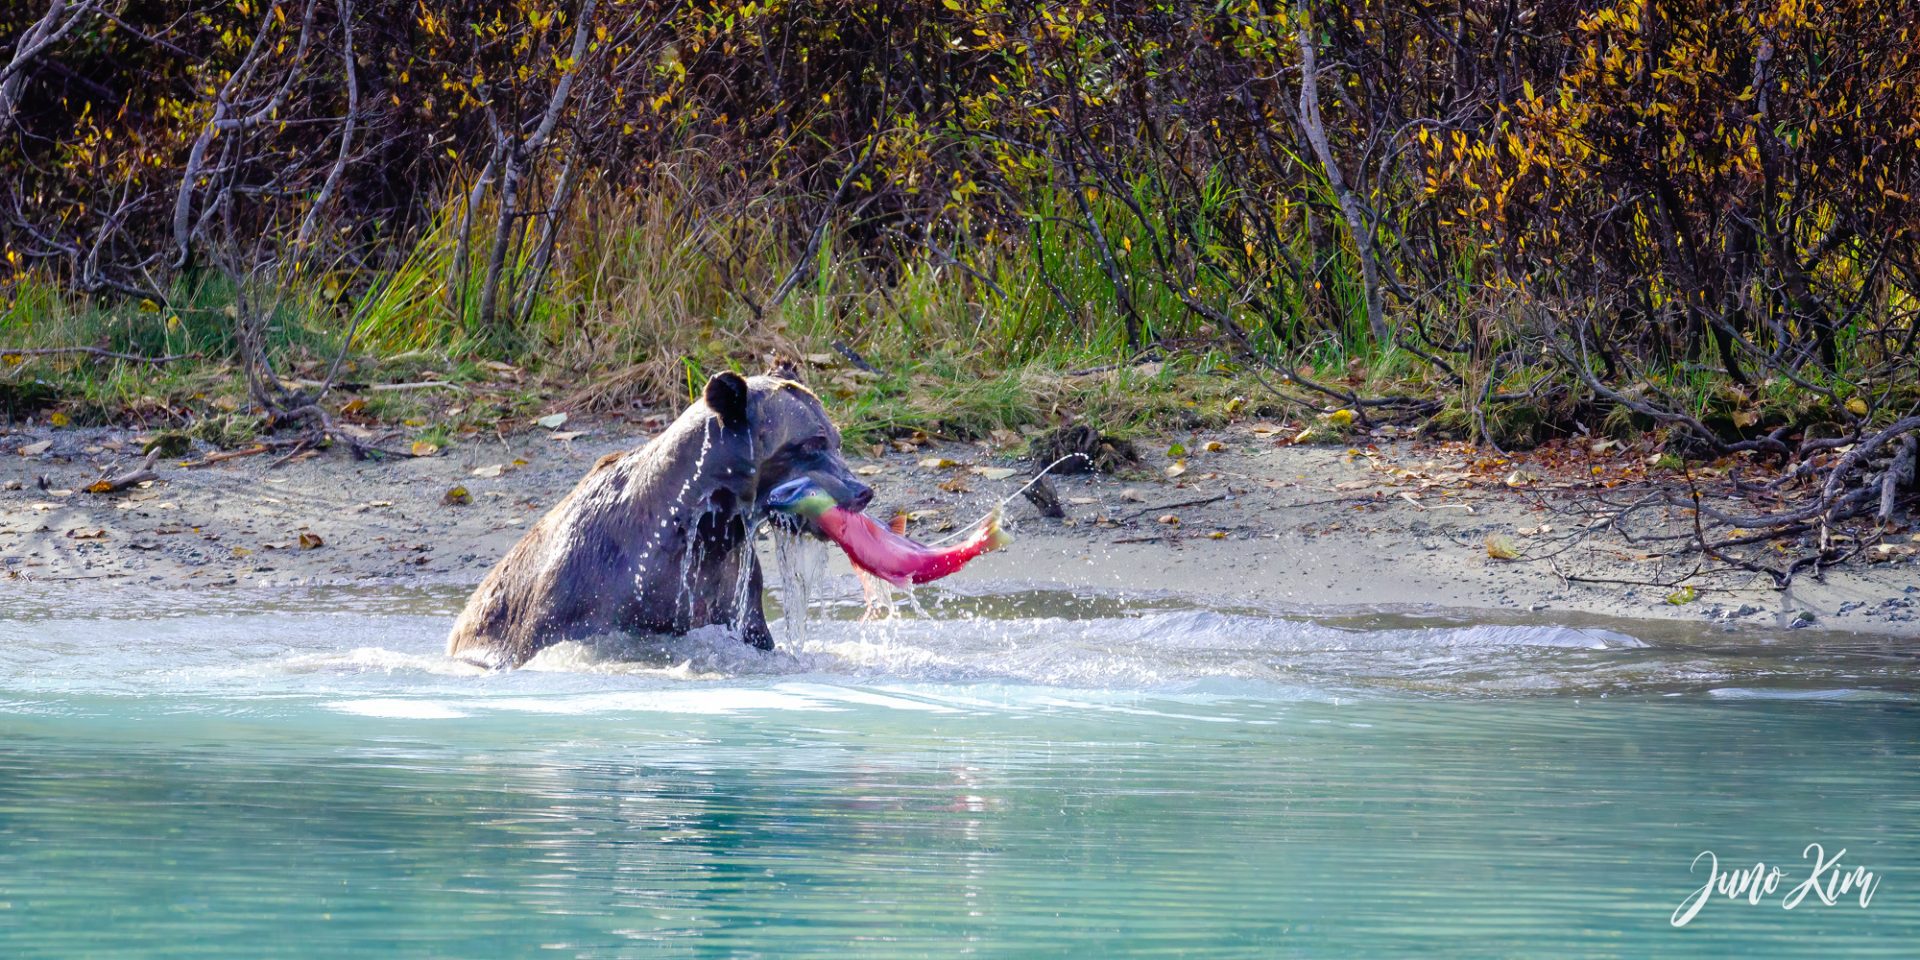 Bear Viewing in Alaska is Even More Amazing than It Sounds